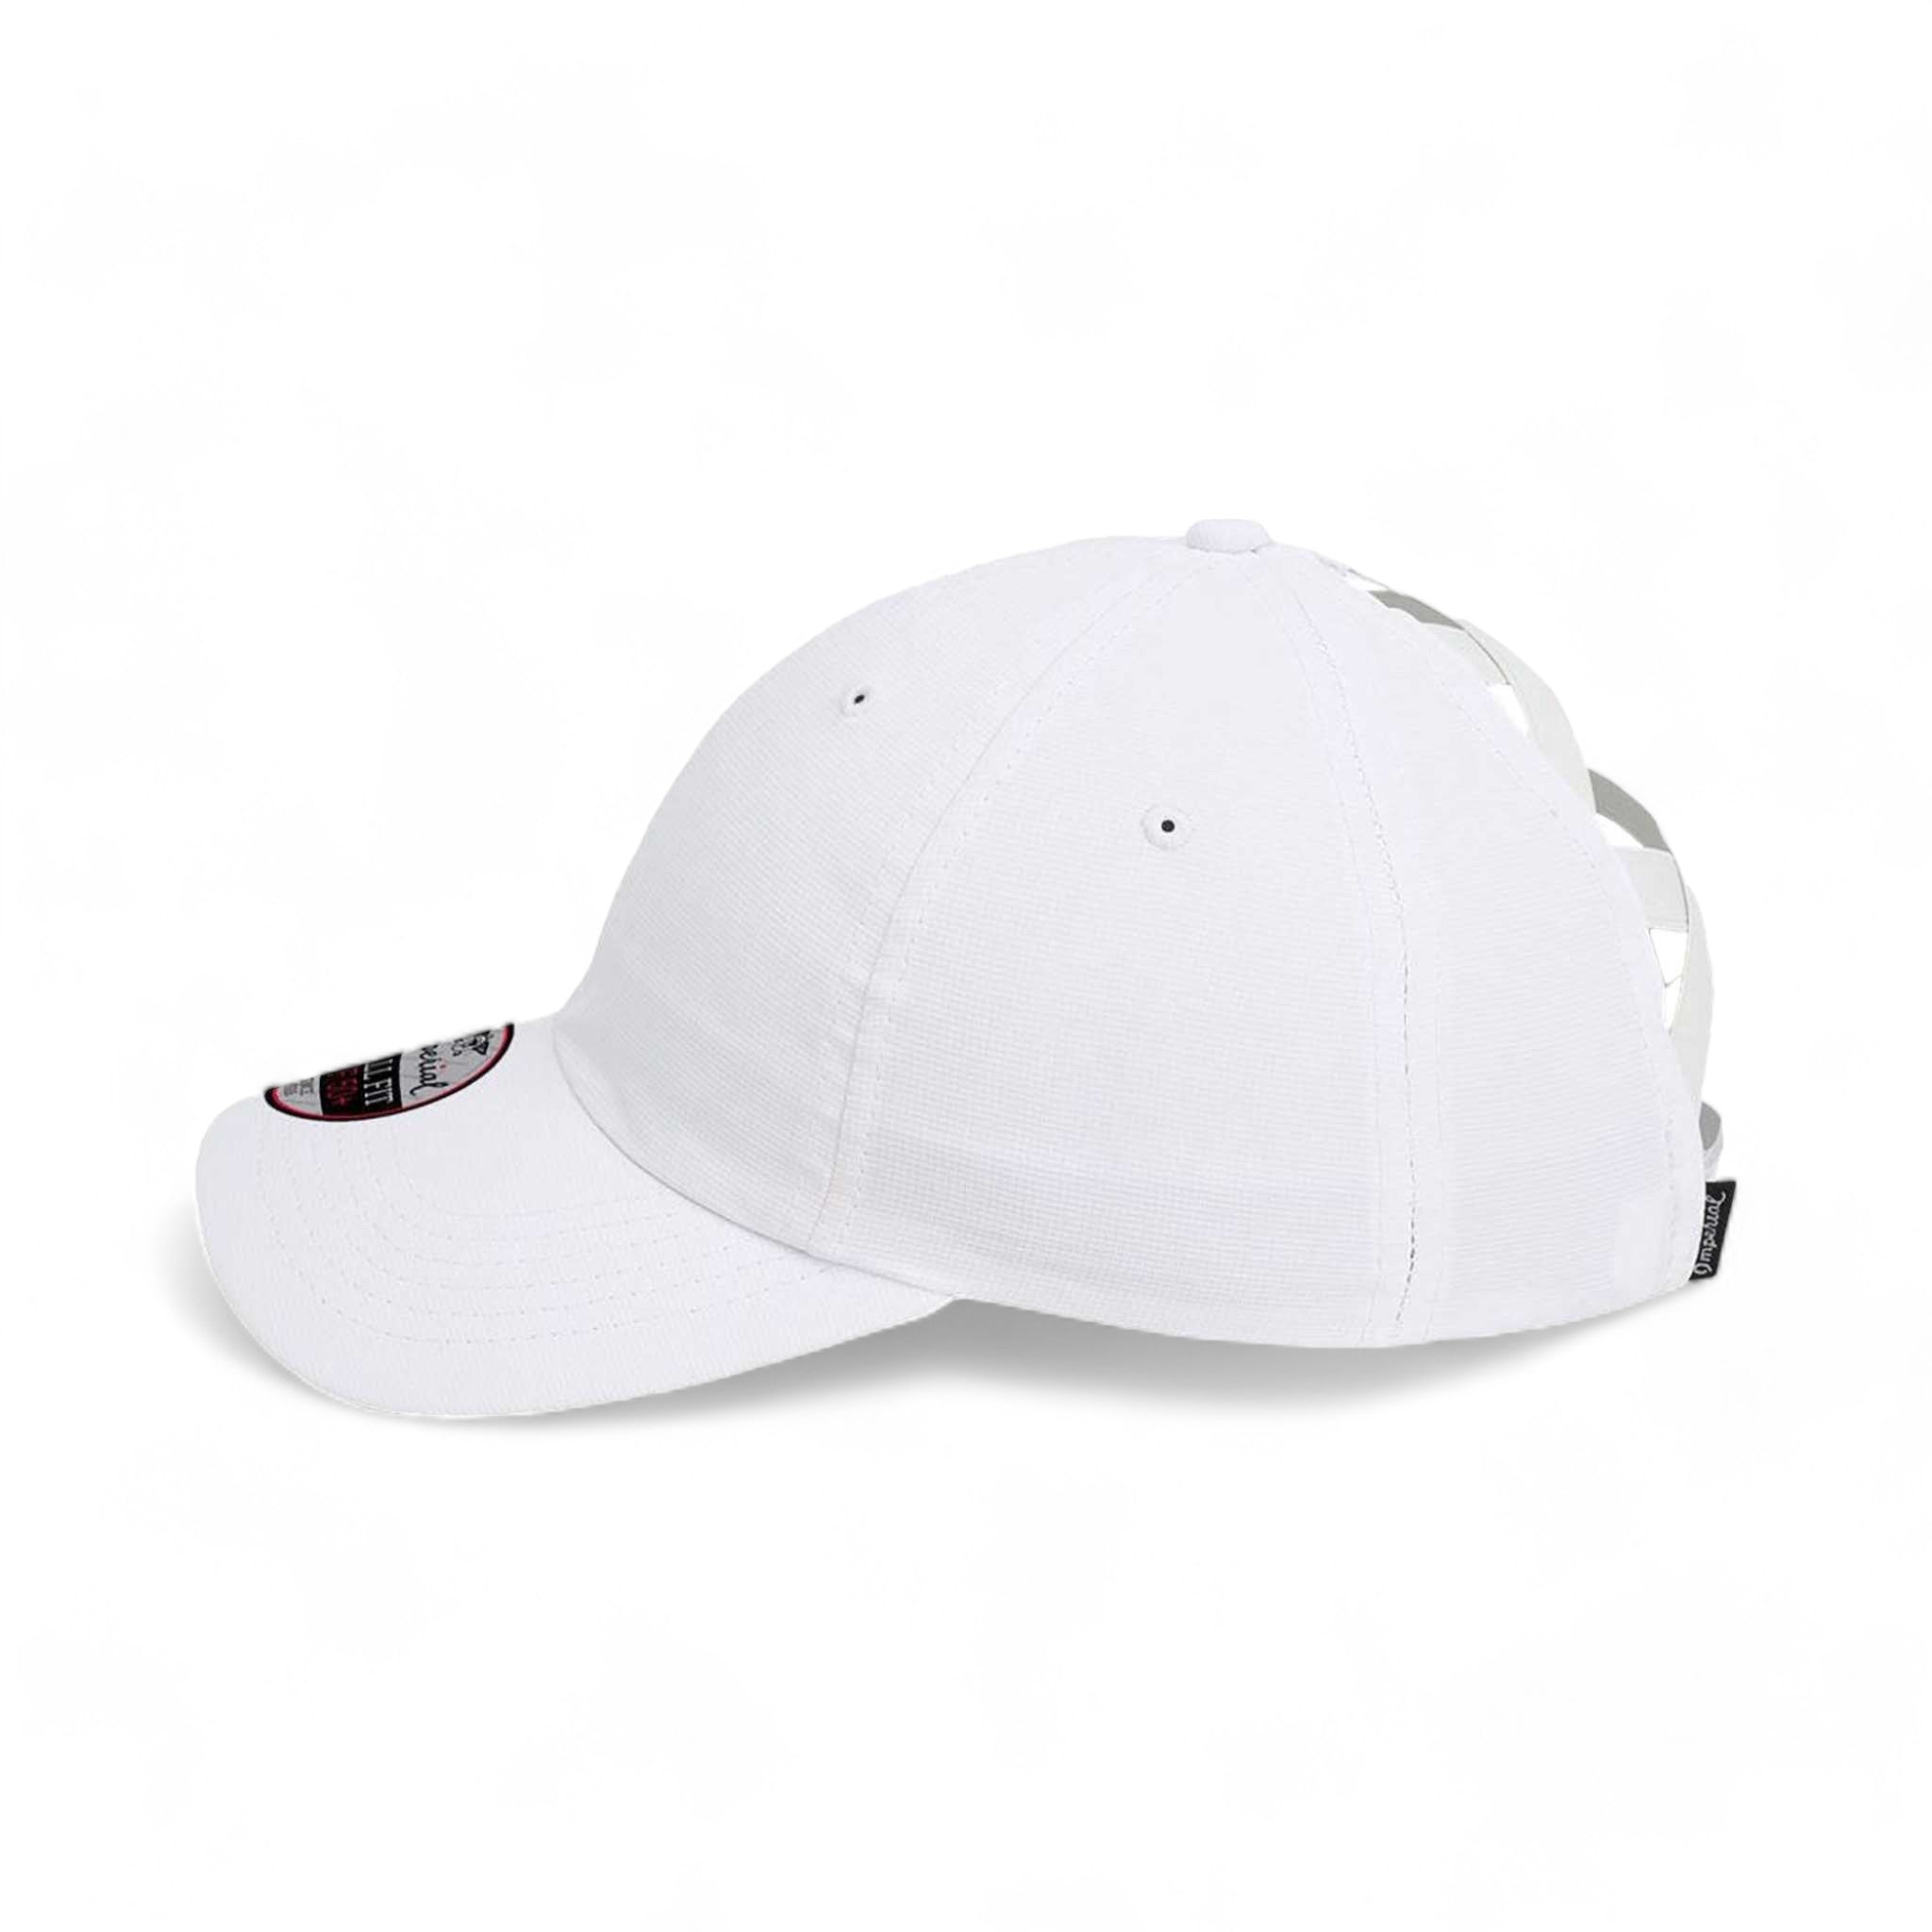 Side view of Imperial L338 custom hat in white